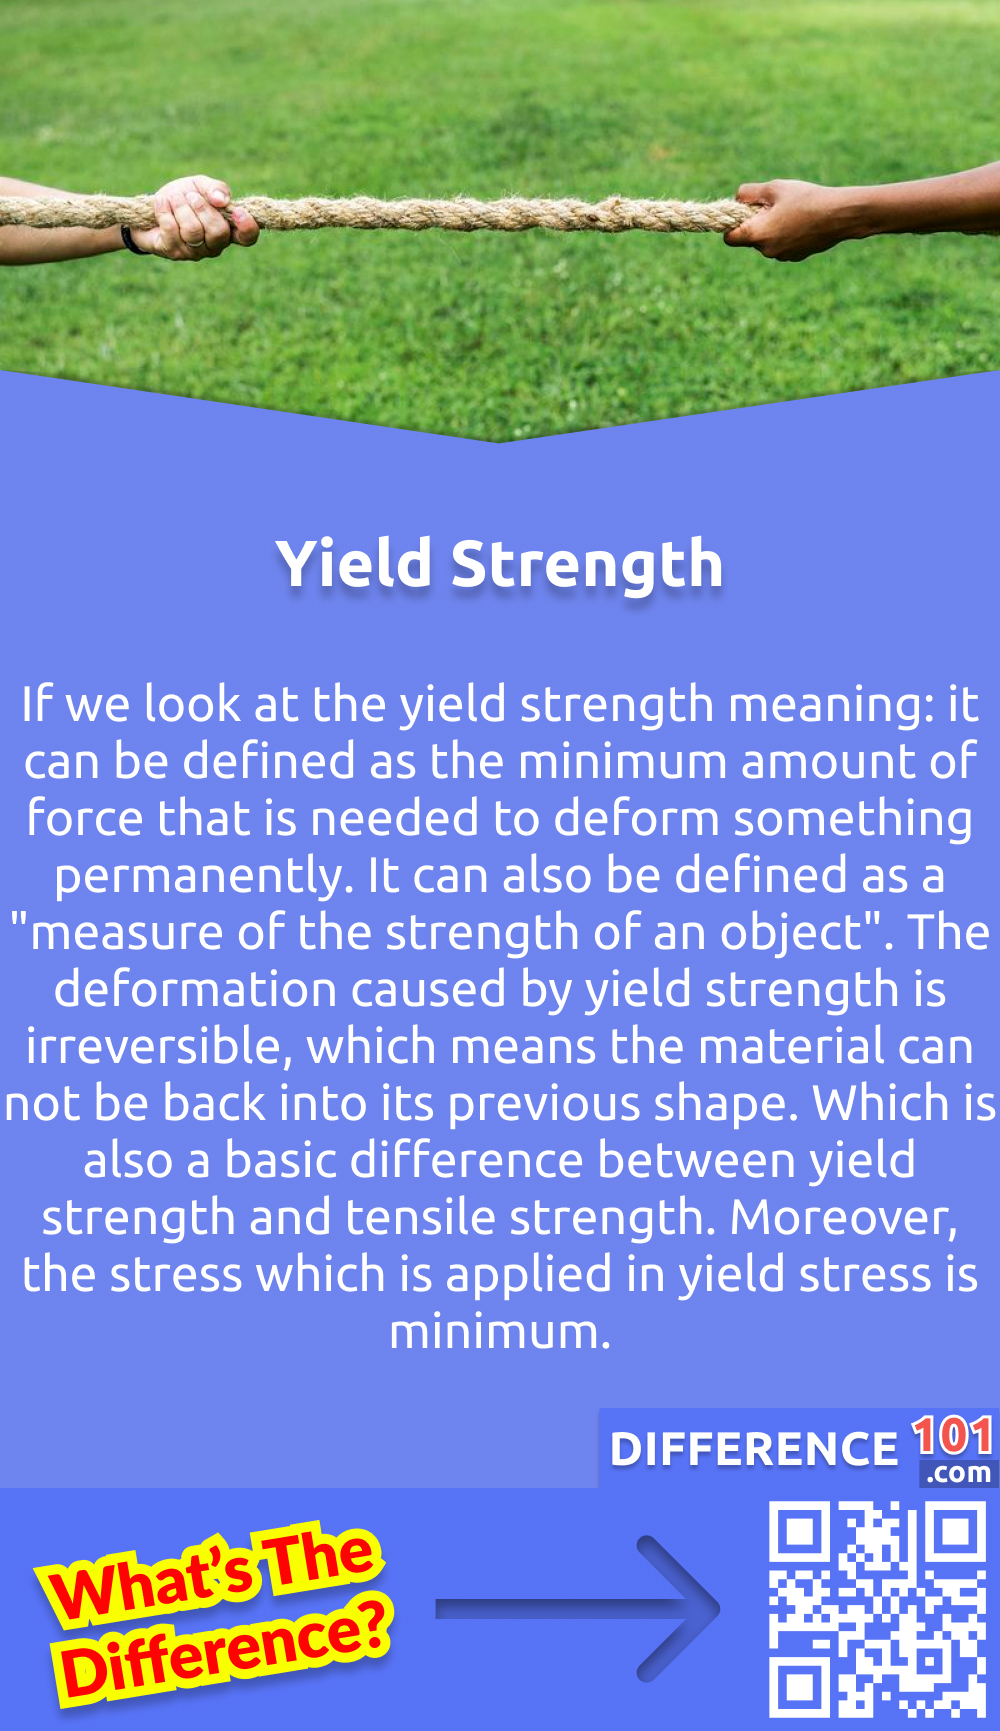 What Is Yield Strength? If we look at the yield strength meaning: it can be defined as the minimum amount of force that is needed to deform something permanently. It can also be defined as a "measure of the strength of an object". The deformation caused by yield strength is irreversible, which means the material can not be back into its previous shape. Which is also a basic difference between yield strength and tensile strength. Moreover, the stress which is applied in yield stress is minimum. Another term related to yield stress is used in Physics, known as "Elastic Limit".Before reaching the yield strength, damage which is caused to a material can be reversed, which is called elastic deformation. But after the elastic limit is reached, the damage is beyond repair, and it is called plastic deformation.